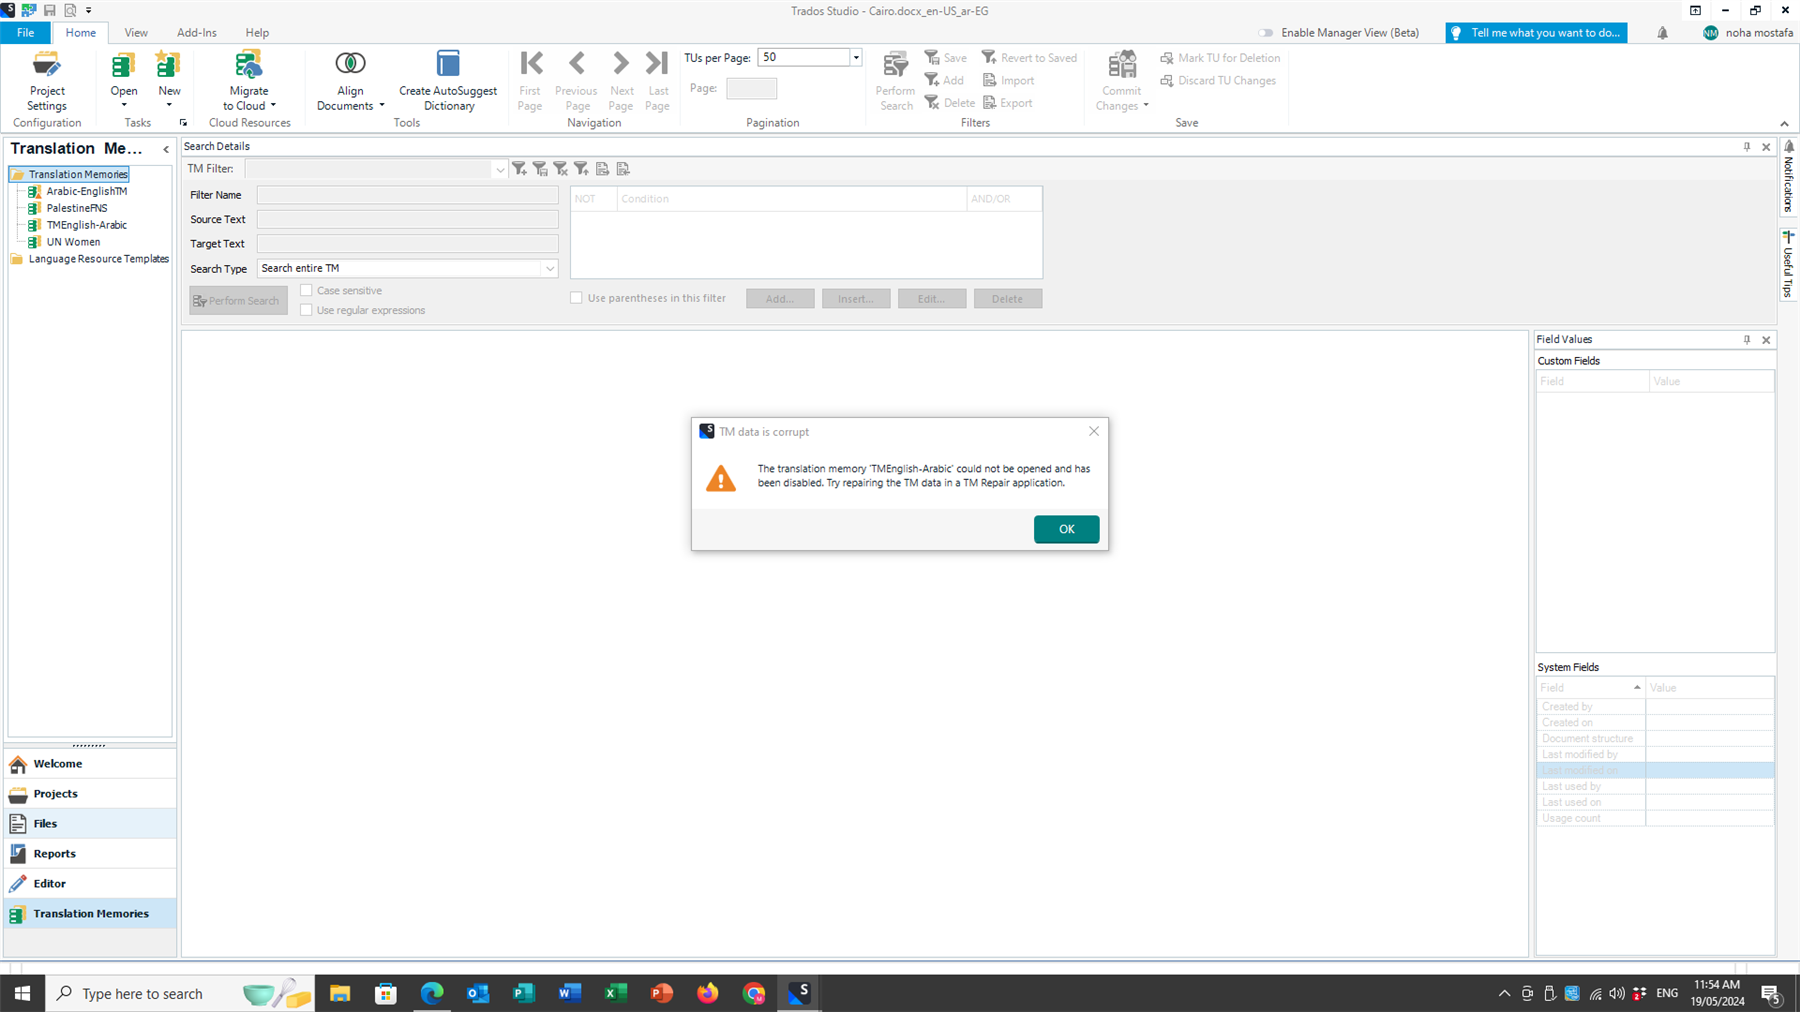 Screenshot of Trados Studio software with an error message window stating 'TM data is corrupt. The translation memory TMEnglish-Arabic could not be opened and has been disabled. Try repairing the TM data in a TM Repair application.'